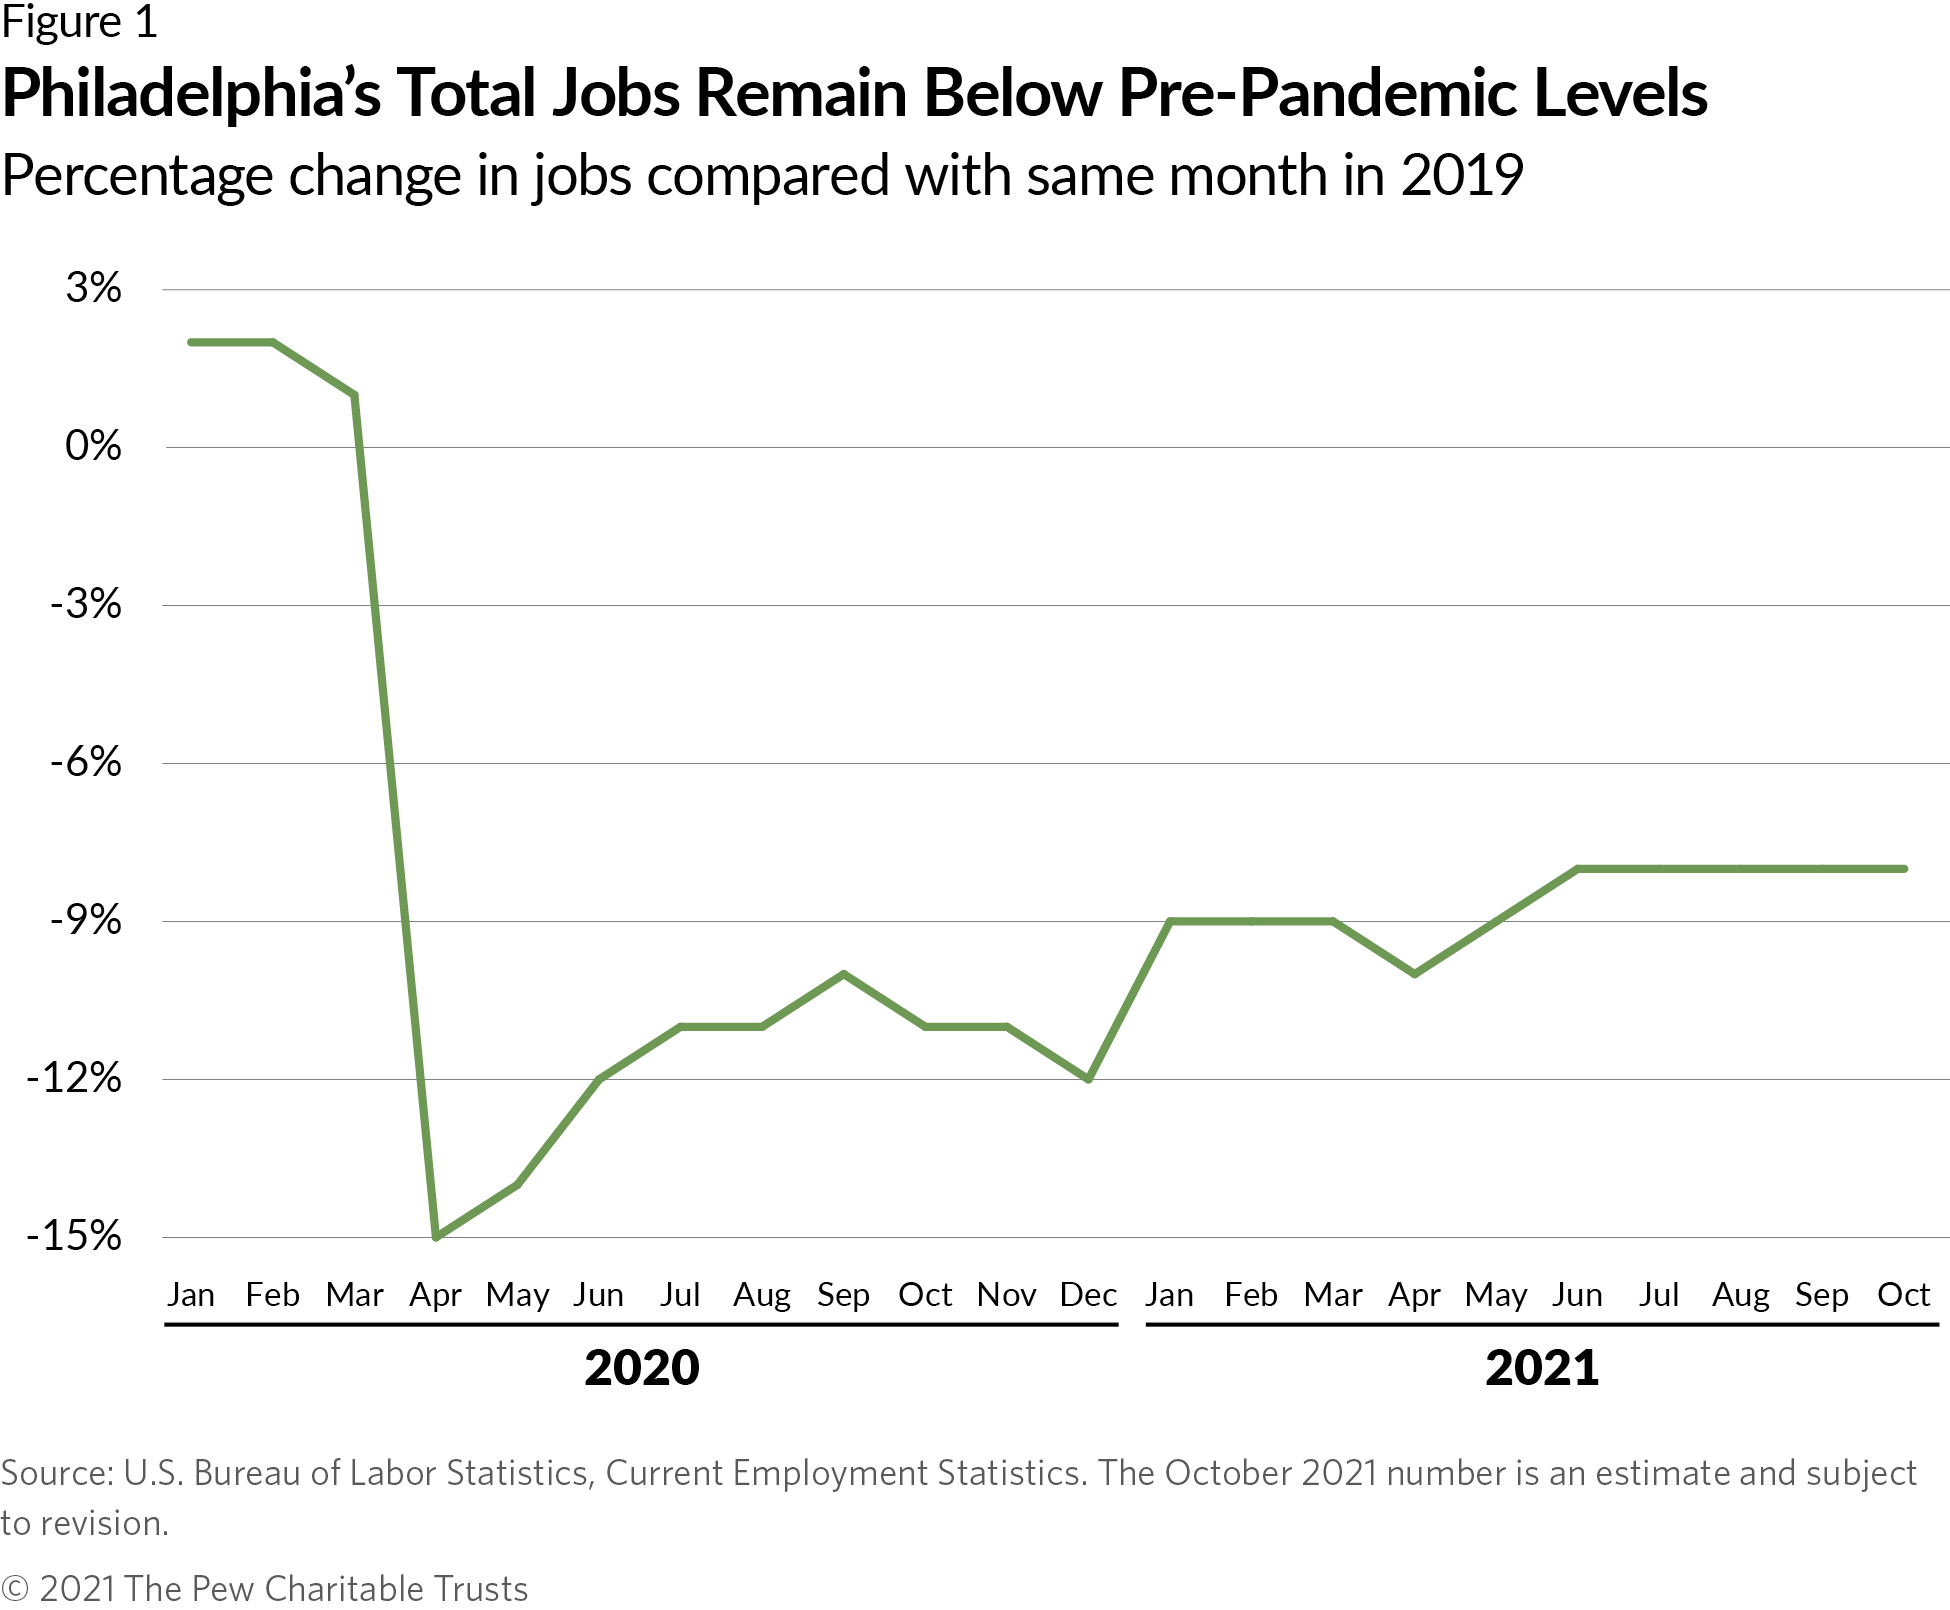 Philadelphia's Total Jobs Remain Below Pre-Pandemic Levels. Percentage change in jobs compared with same month in 2019.